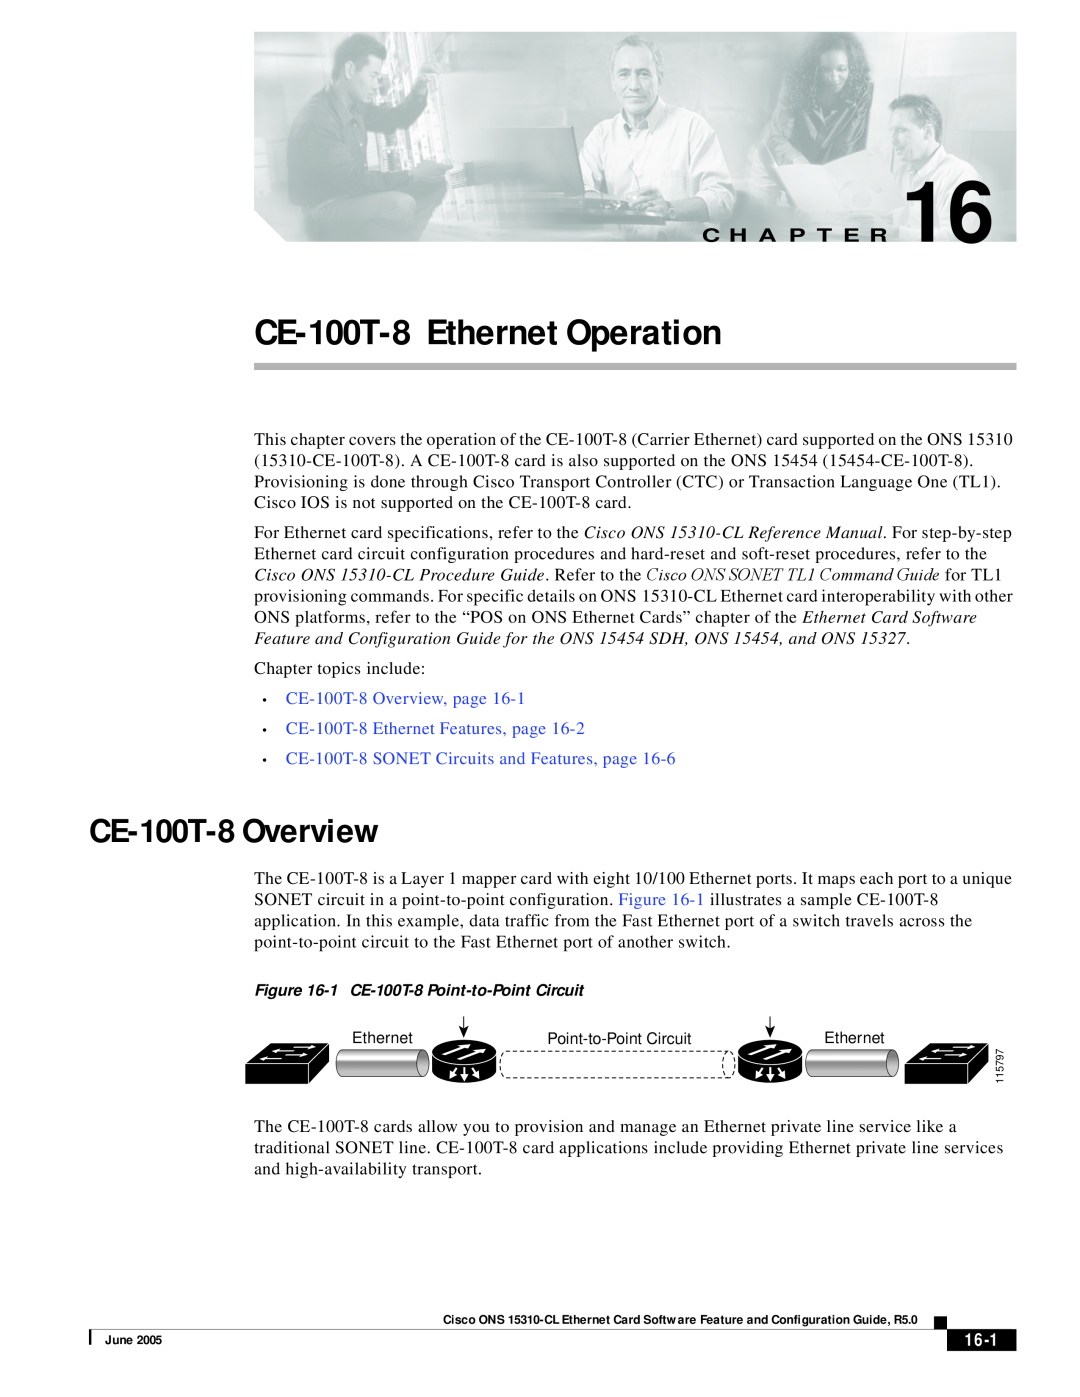 Cisco Systems specifications CE-100T-8 Overview, 16-1, CE-100T-8 Ethernet Operation, C H A P T E R 